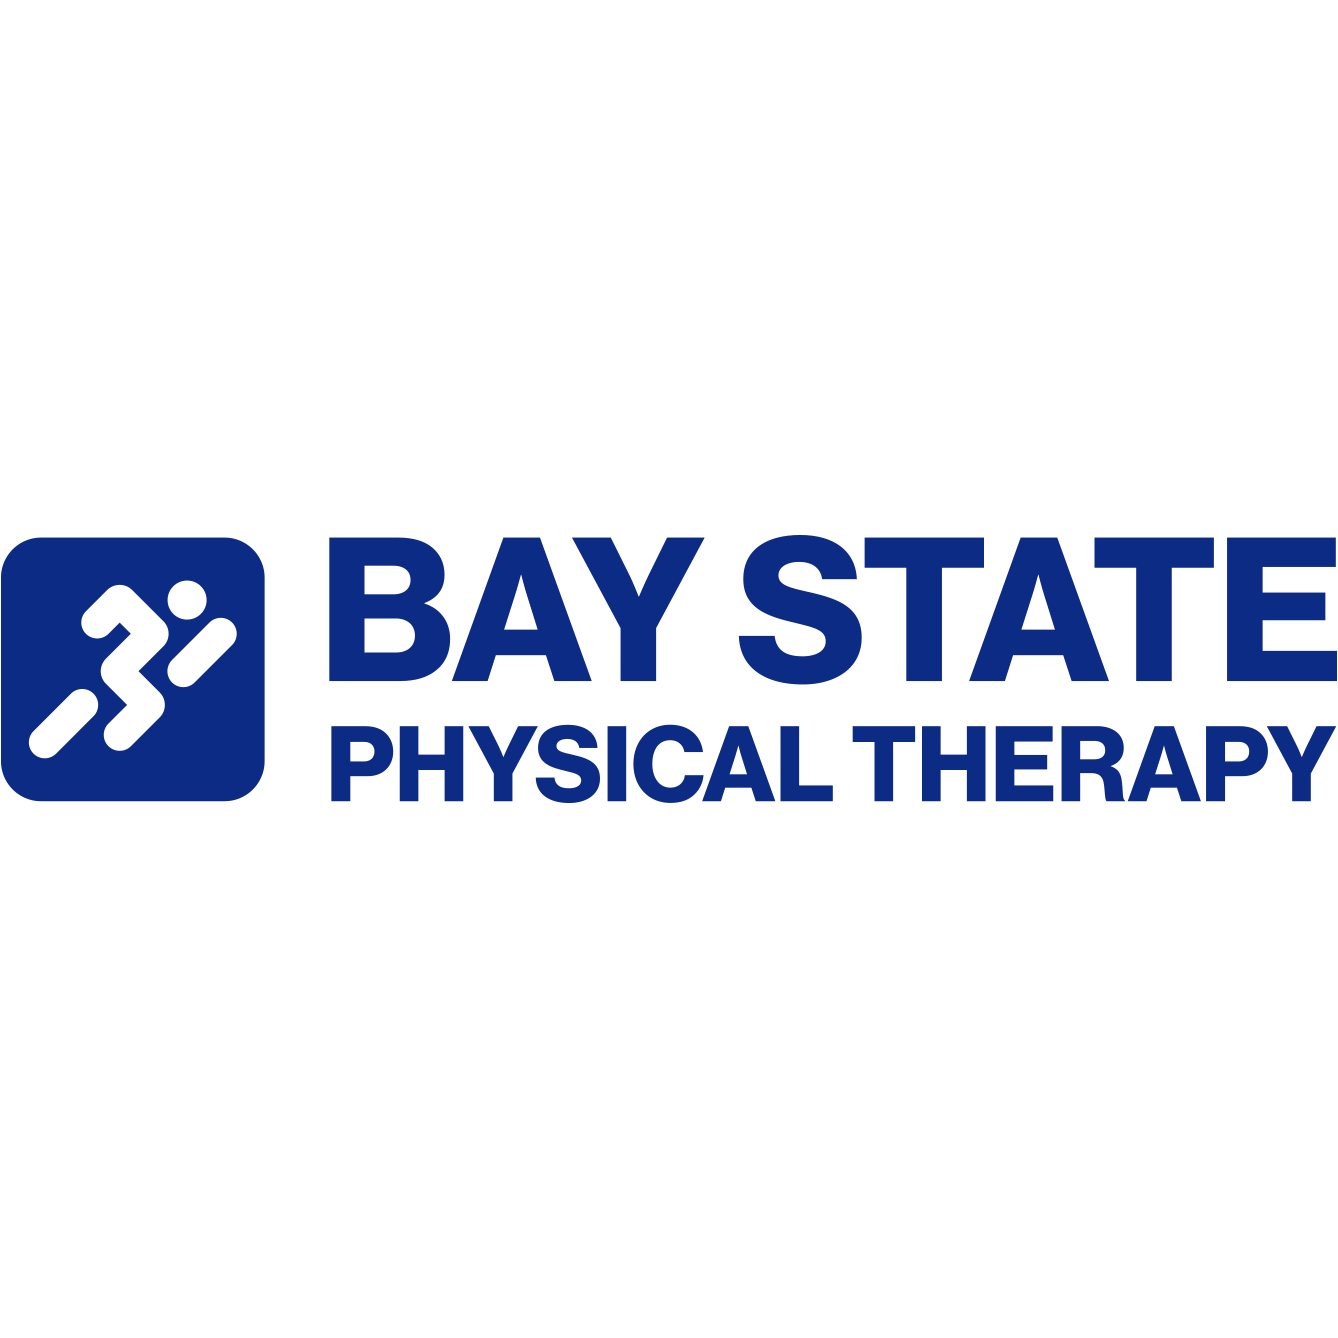 Bay State Physical Therapy 711 W Center St, West Bridgewater Massachusetts 02379